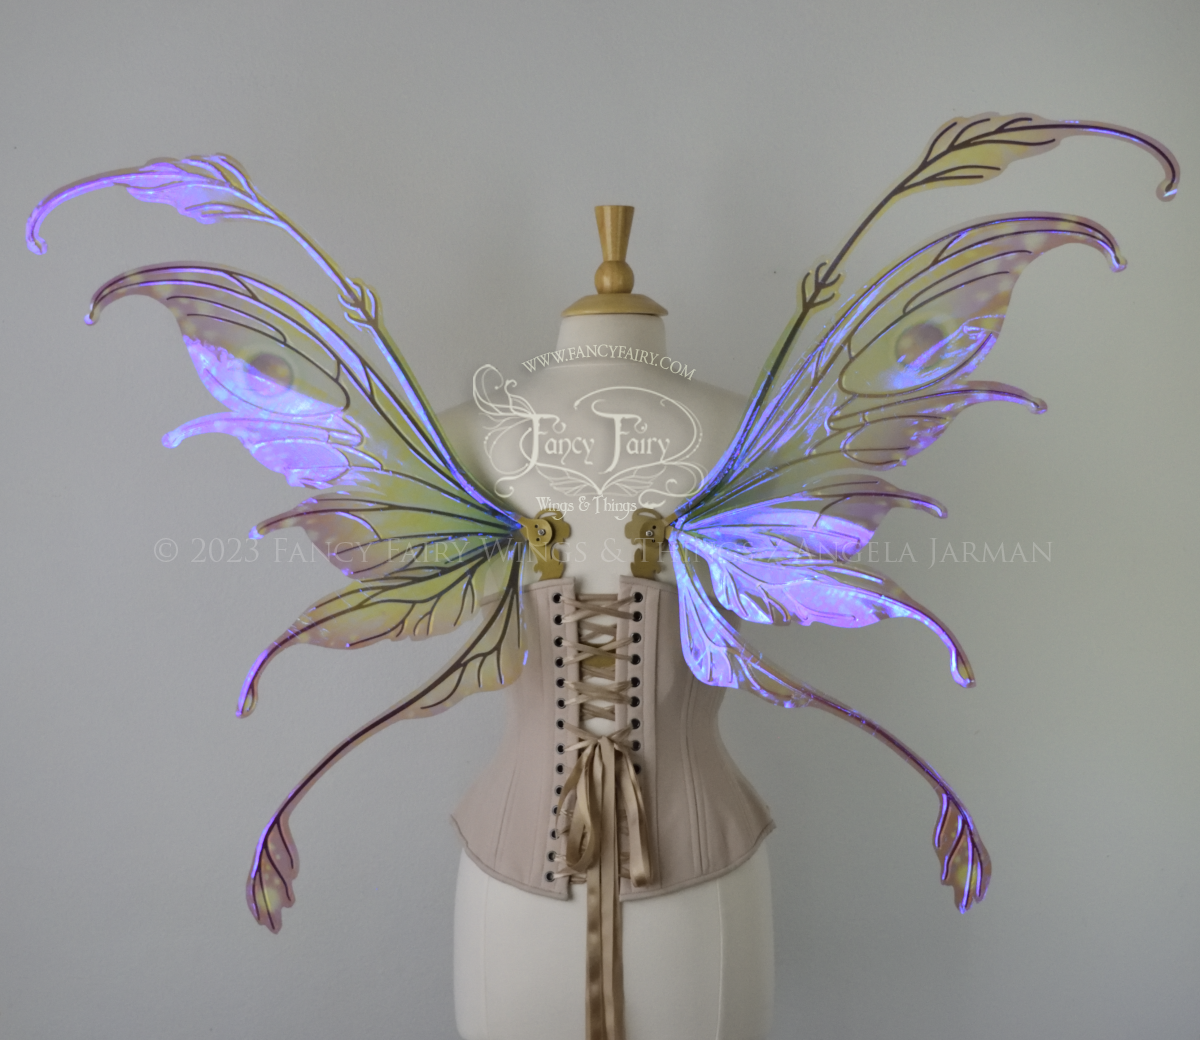 Back view of a dress form wearing an underbust corset & 'Fauna' transparent pink, violet & green iridescent fairy wings with downward curved tips, antennae & wispy 'tails', with gold veining